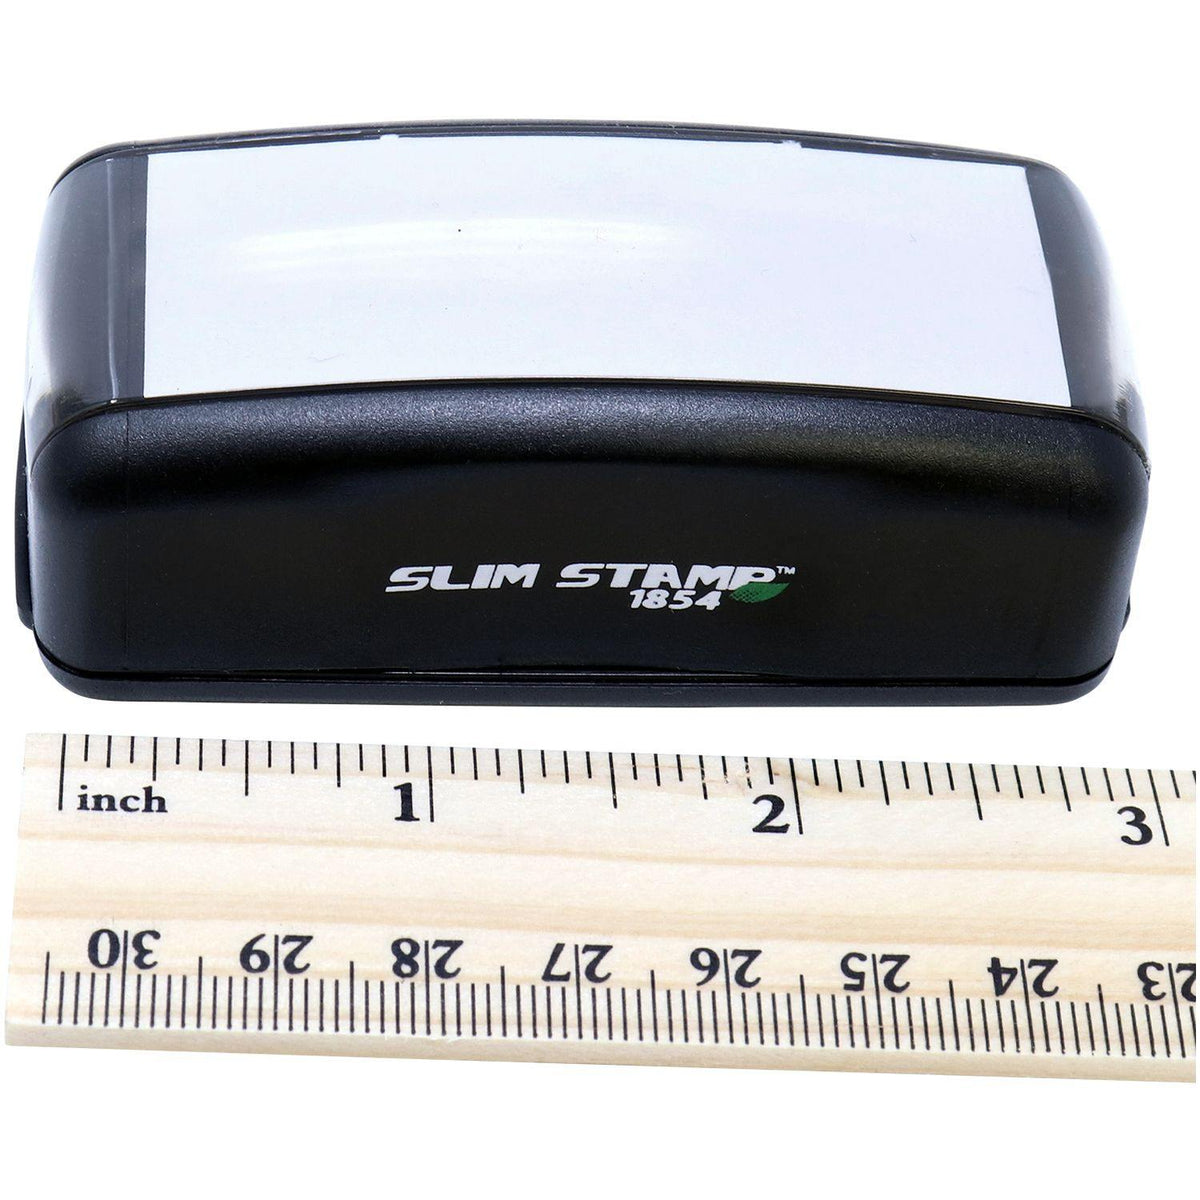 Measurement Large Pre-Inked Special Standard Mail Stamp with Ruler